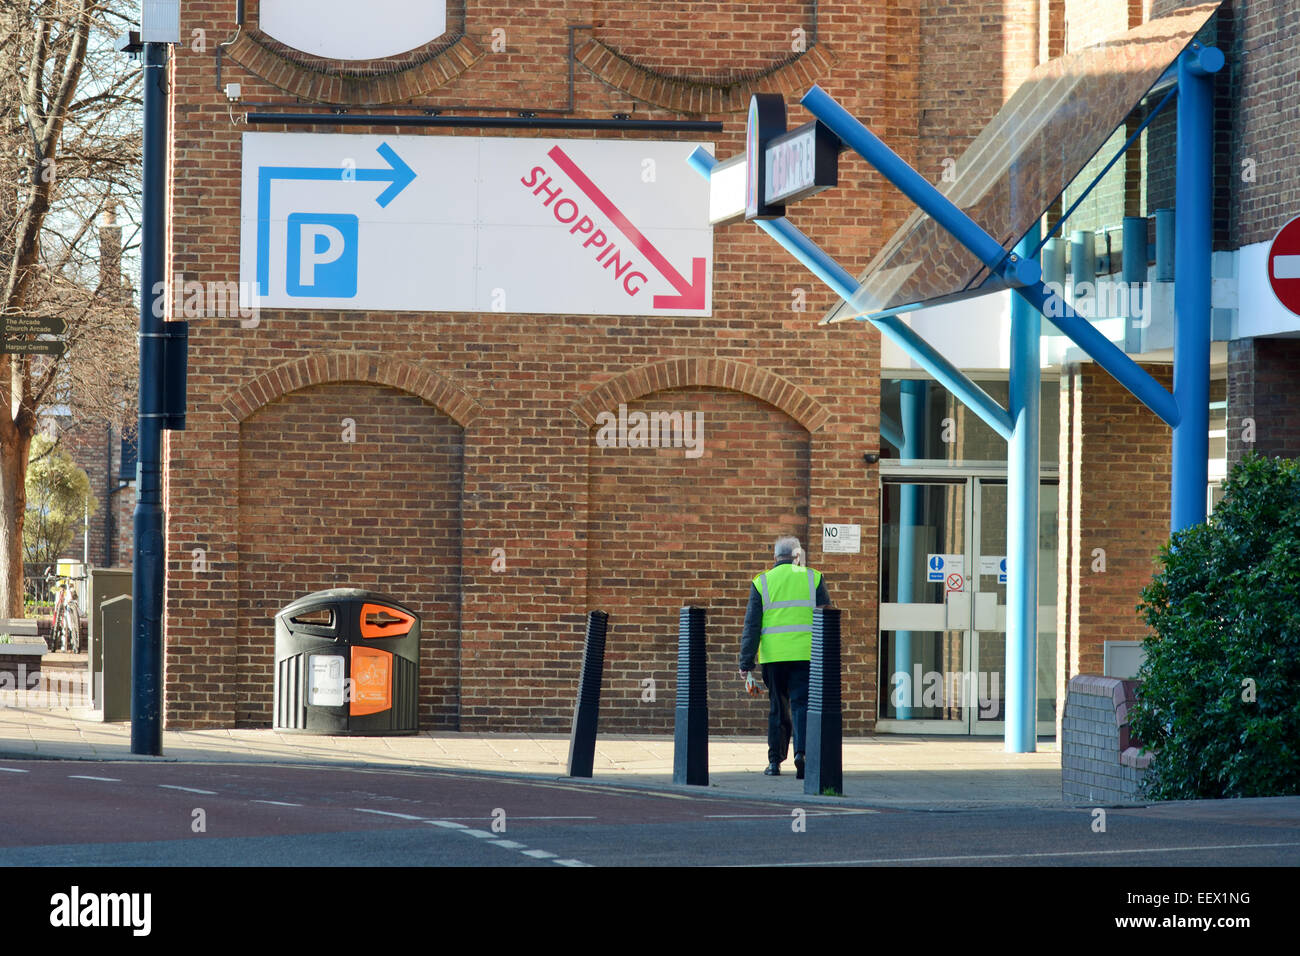 Parking and shopping sign with arrows in Bedford town centre, Bedfordshire, England Stock Photo